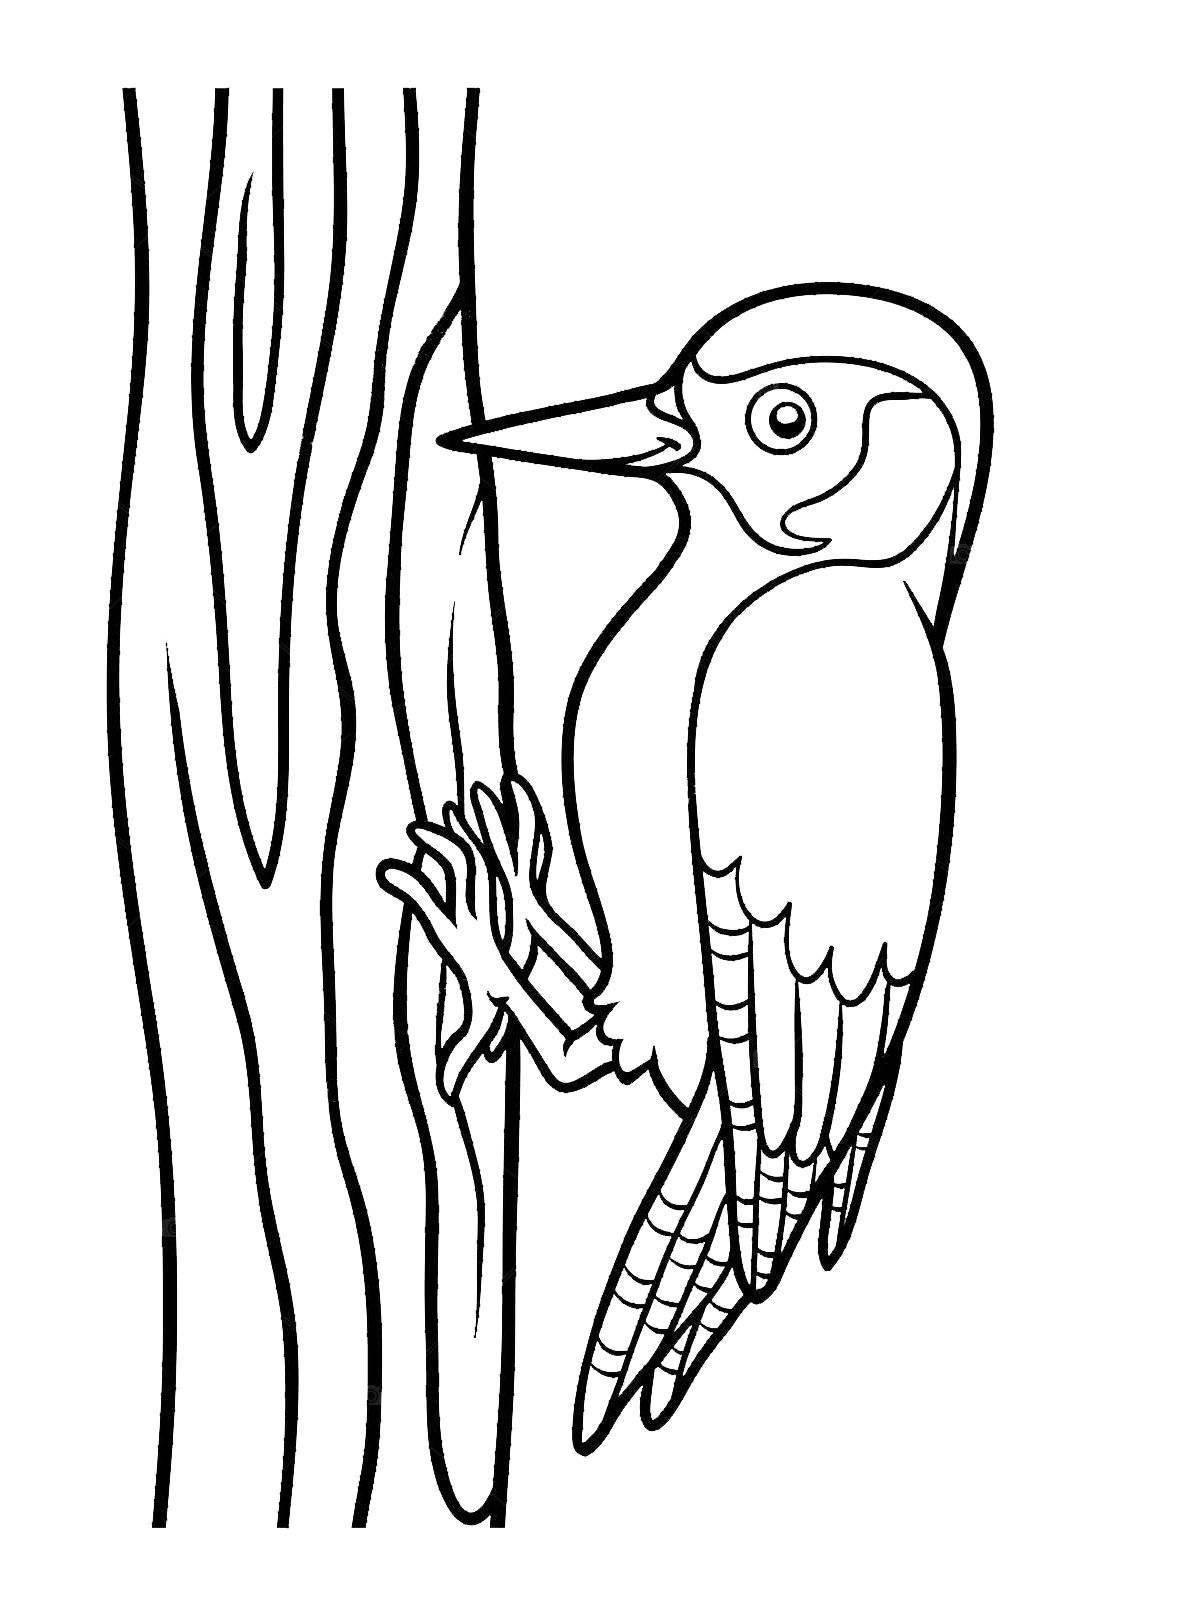 Coloring book cute woodpecker for children 6-7 years old